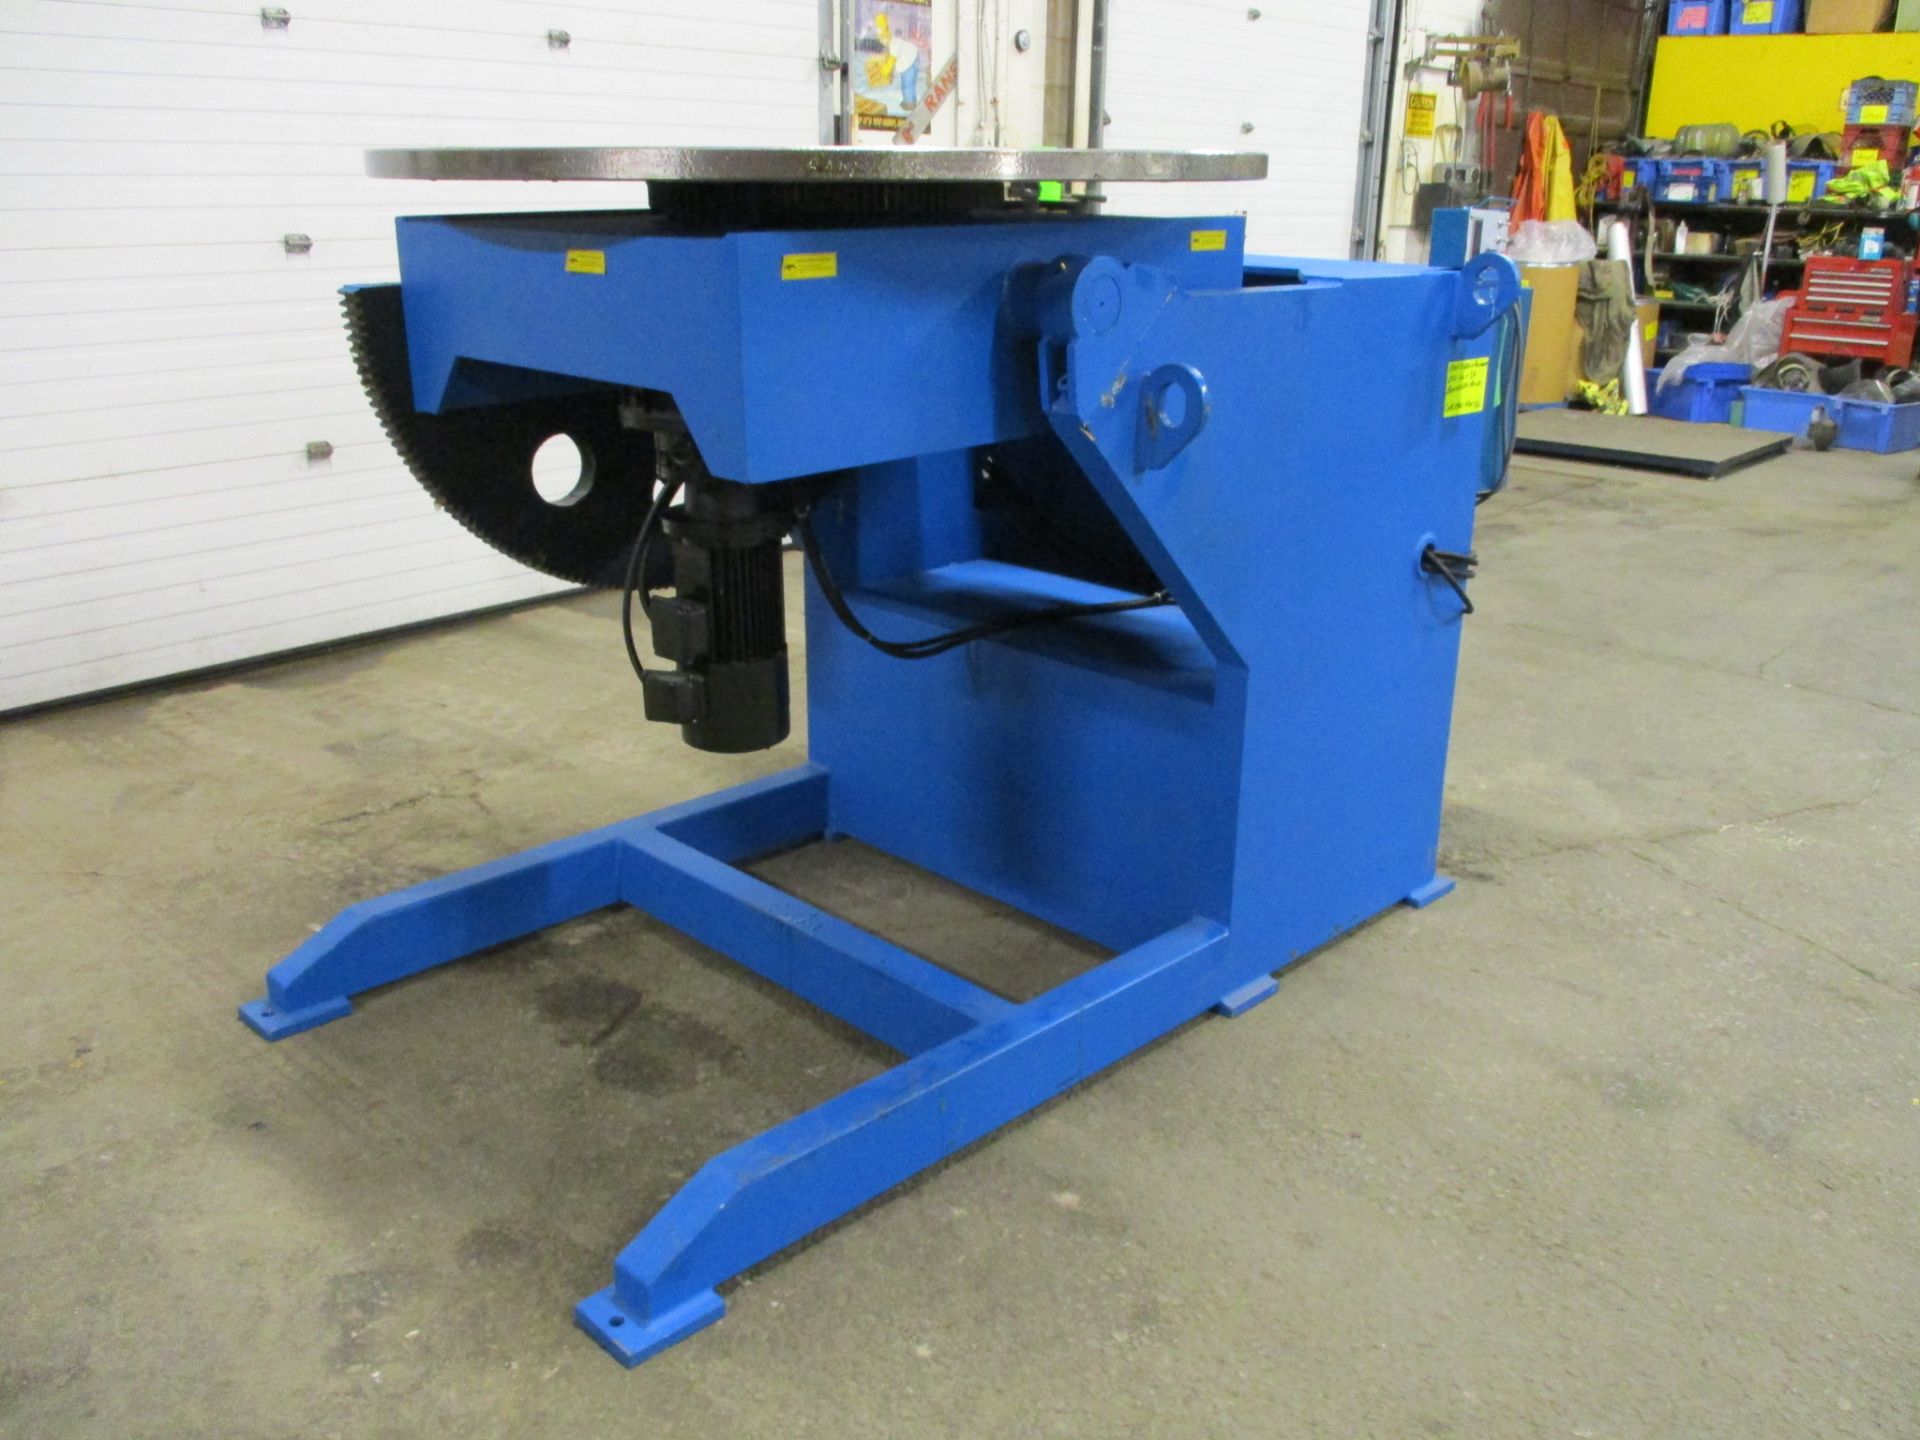 Verner model VD-8000 WELDING POSITIONER 8000lbs capacity - tilt and rotate with variable speed drive - Image 2 of 3